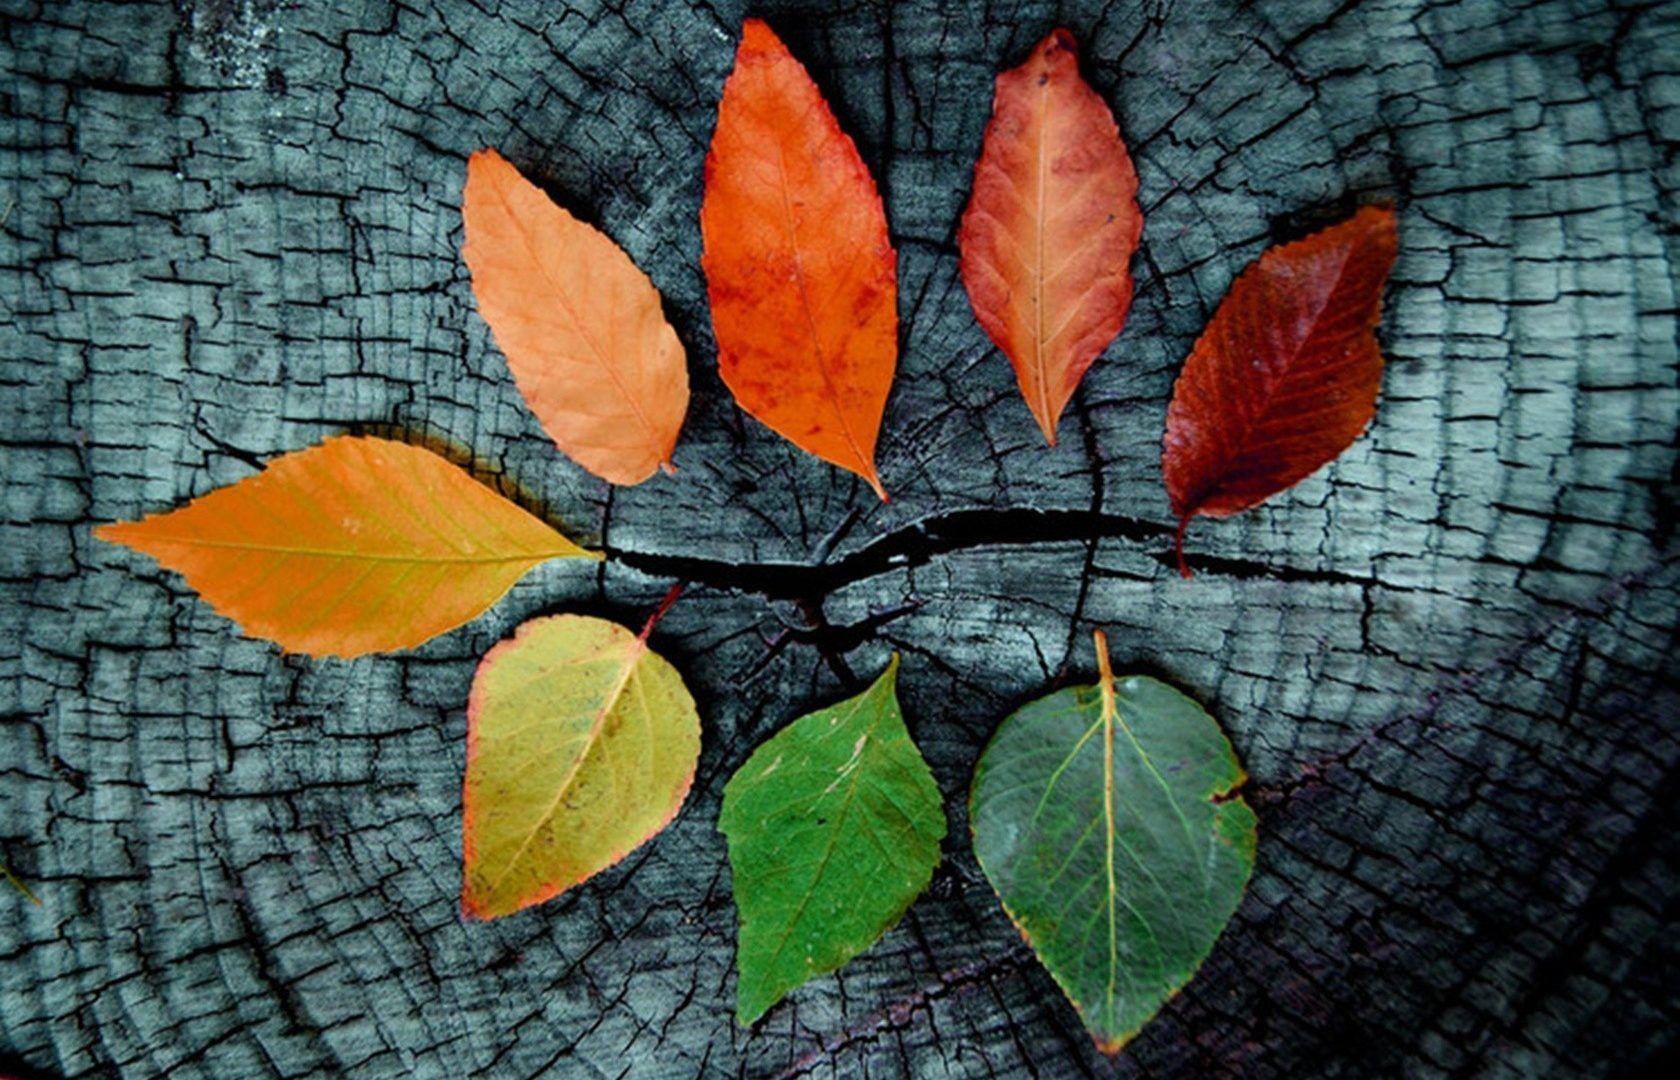 Other: Autumn Tumblr Leafs Nature Fall Phone Wallpaper for HD 16:9